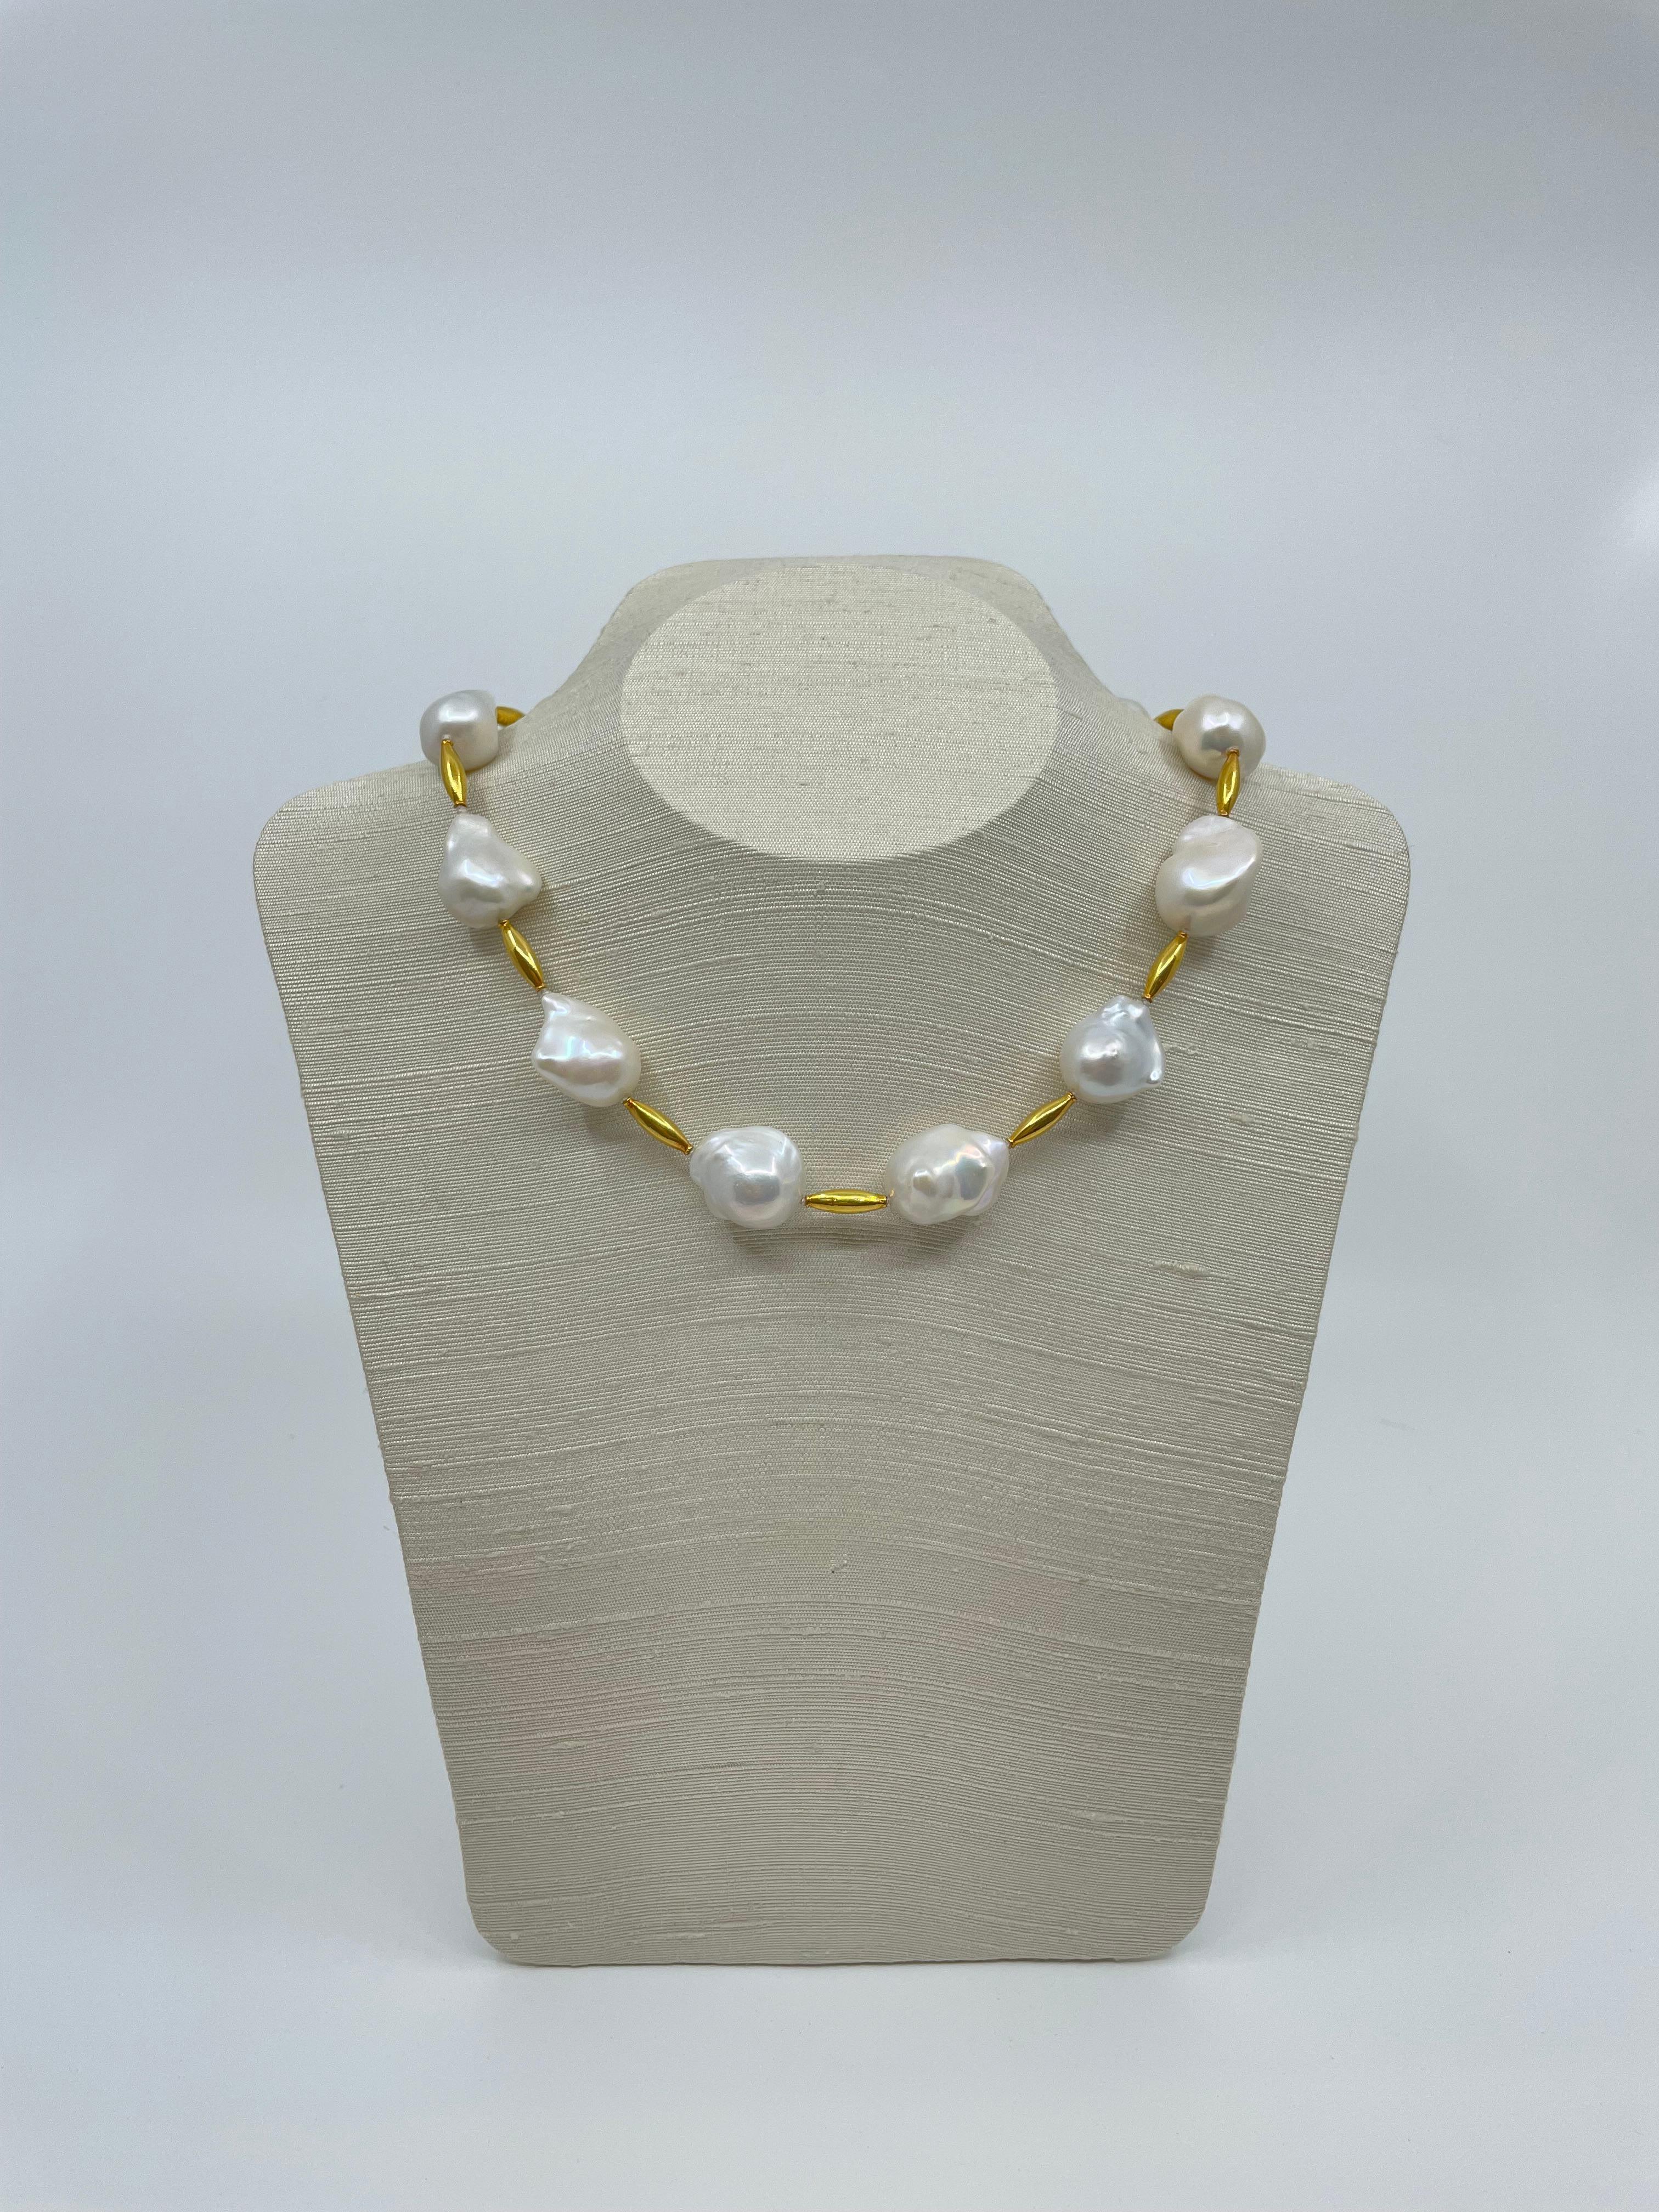 A statement necklace, the organic-formed baroque pearls are spaced by 18k gold tube-shaped beads and closes with an 18k gold toggle clasp. The pearls are lustrous and this 17.25